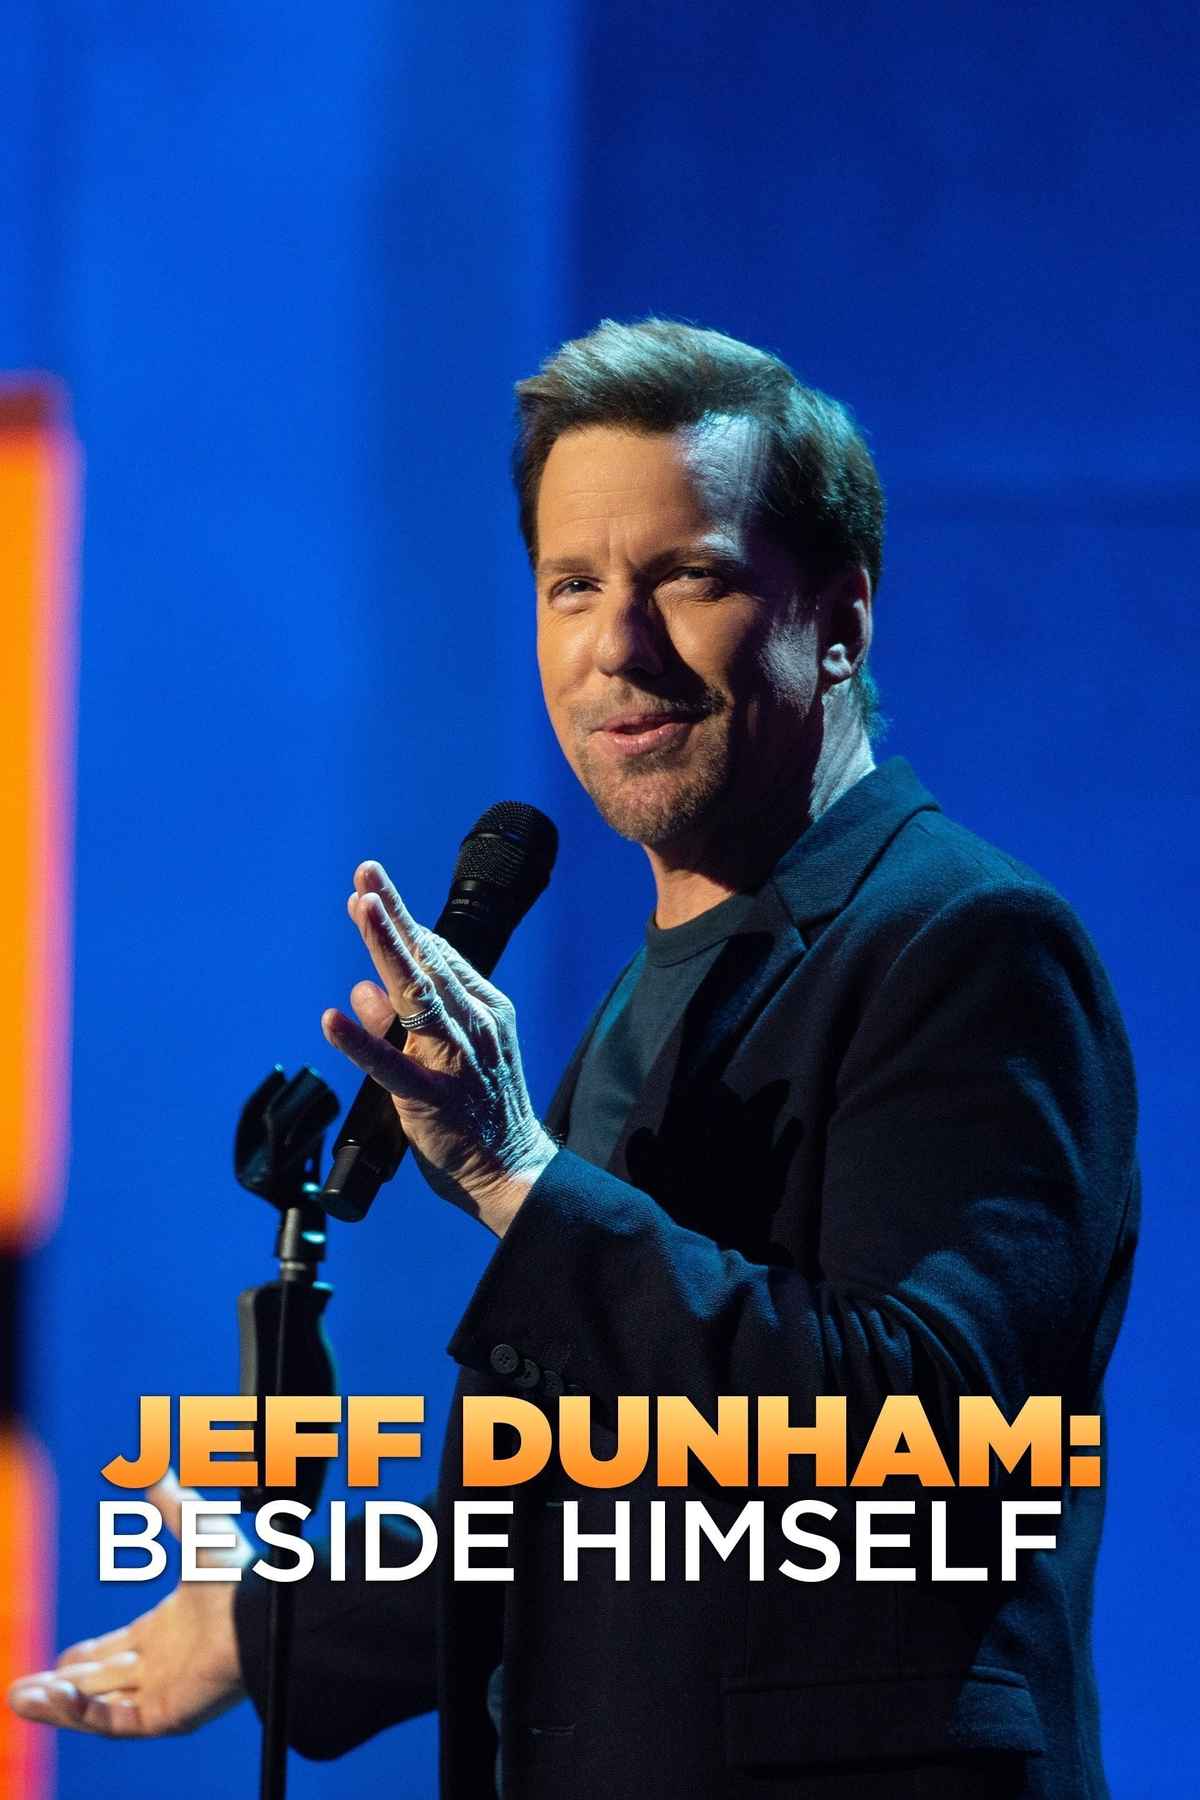 Jeff Dunham Best Movies, TV Shows and Web Series List